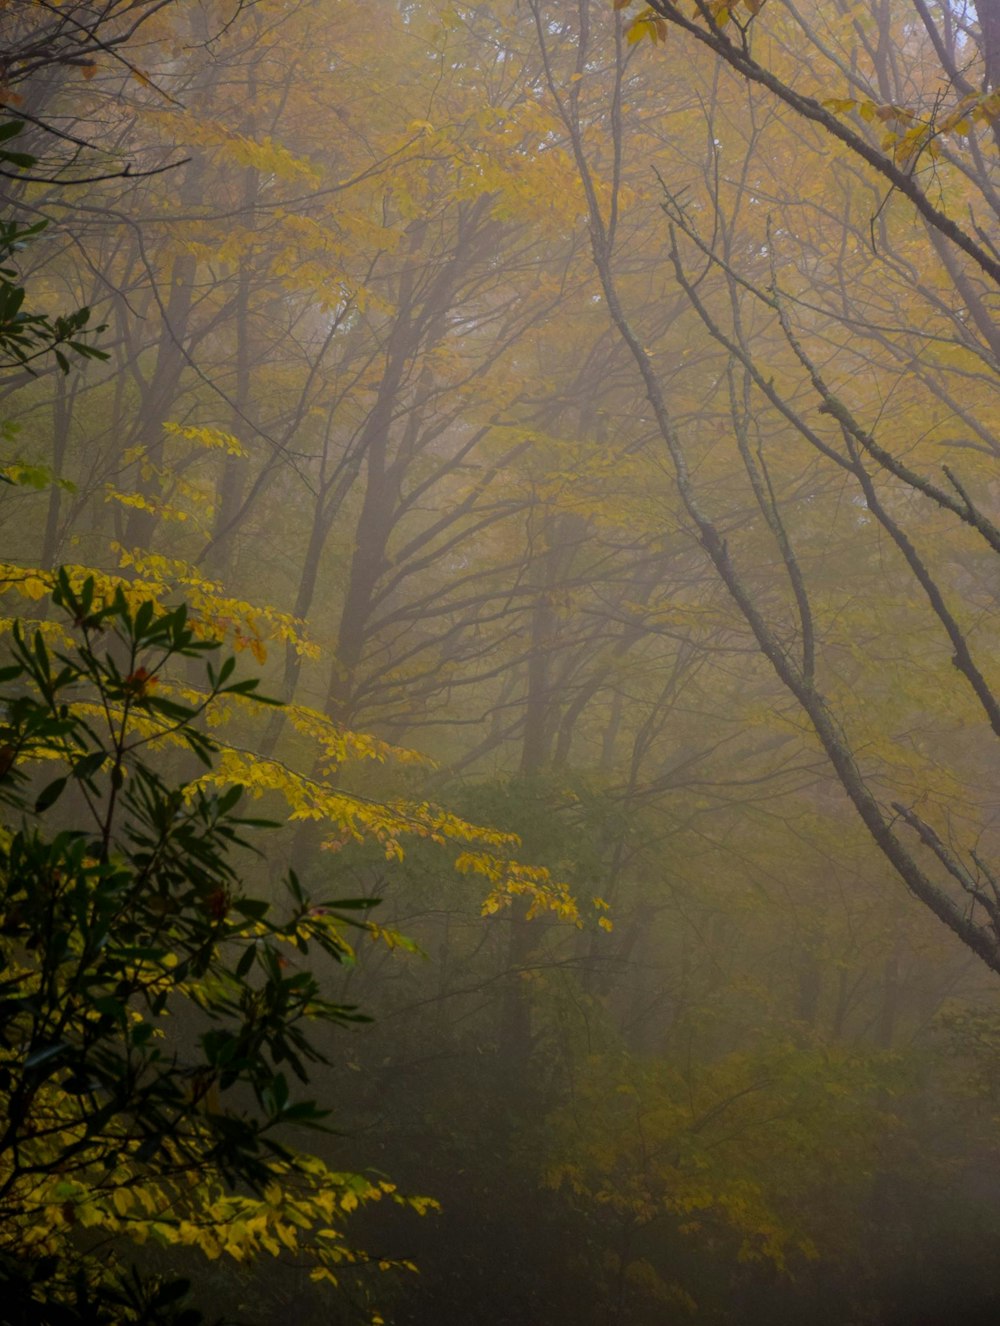 100 Stunning Misty Forest Pictures Download Free Images On Unsplash